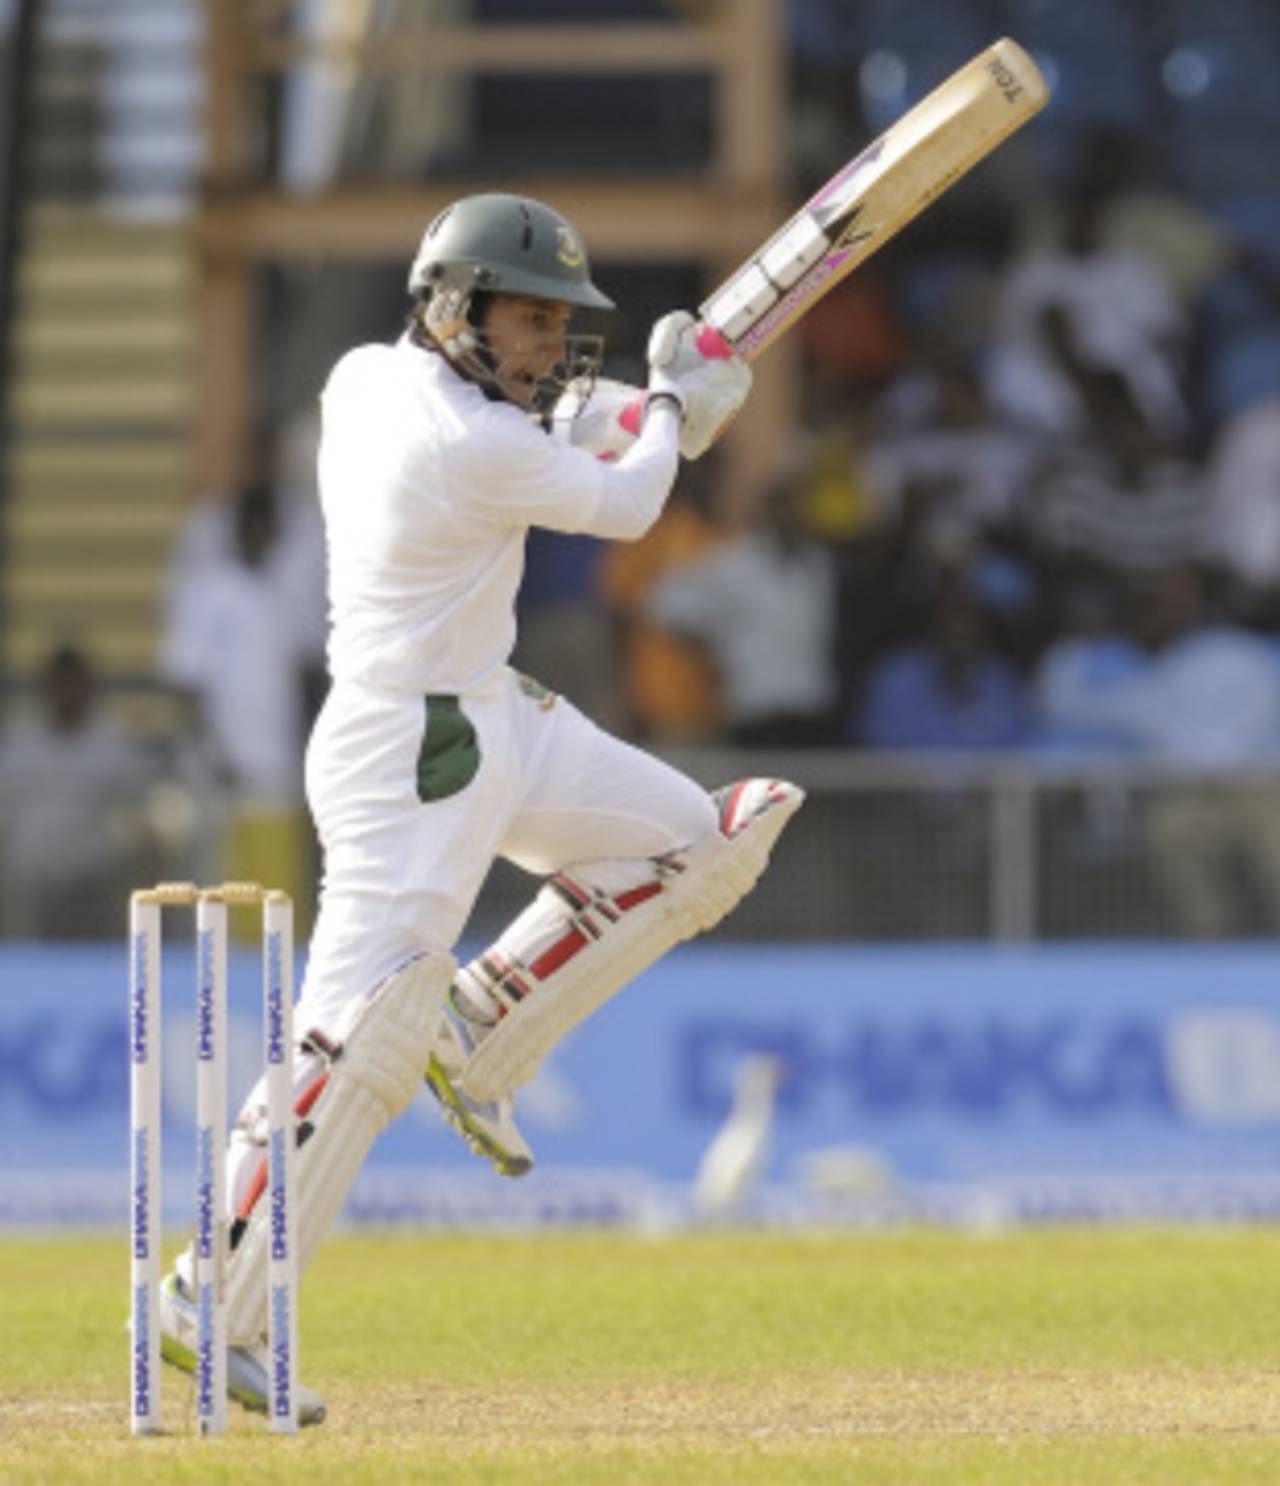 Mushfiqur Rahim scored a century and was only dismissed once in the Test, but the rest of the batting failed&nbsp;&nbsp;&bull;&nbsp;&nbsp;WICB